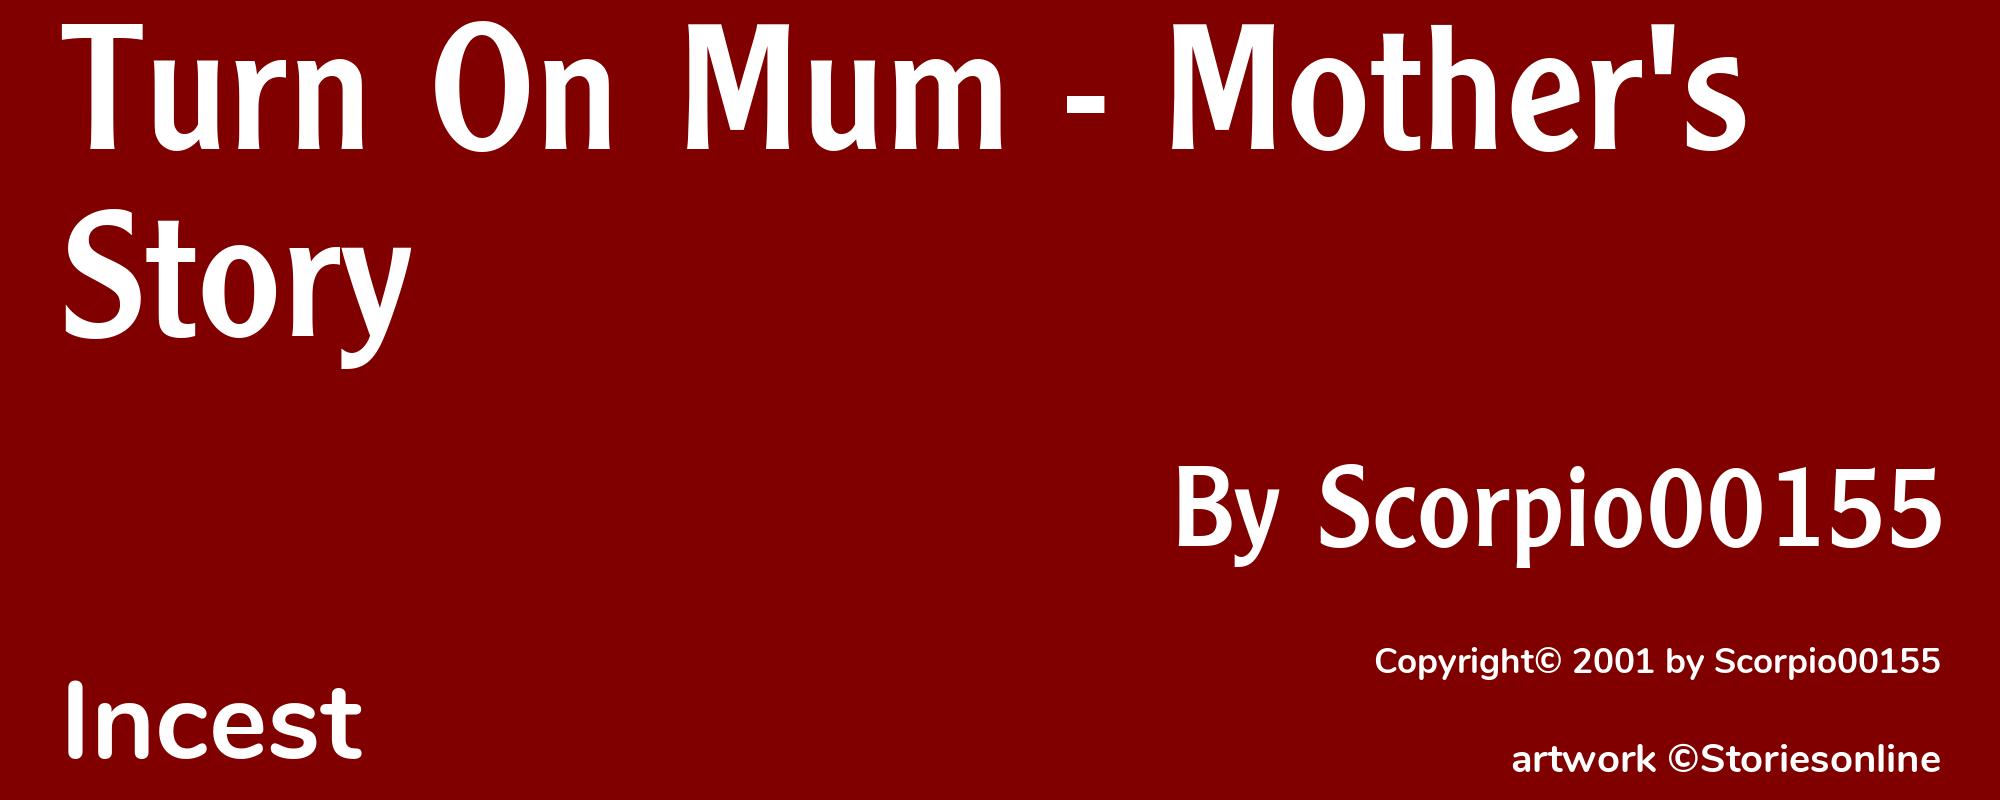 Turn On Mum - Mother's Story - Cover